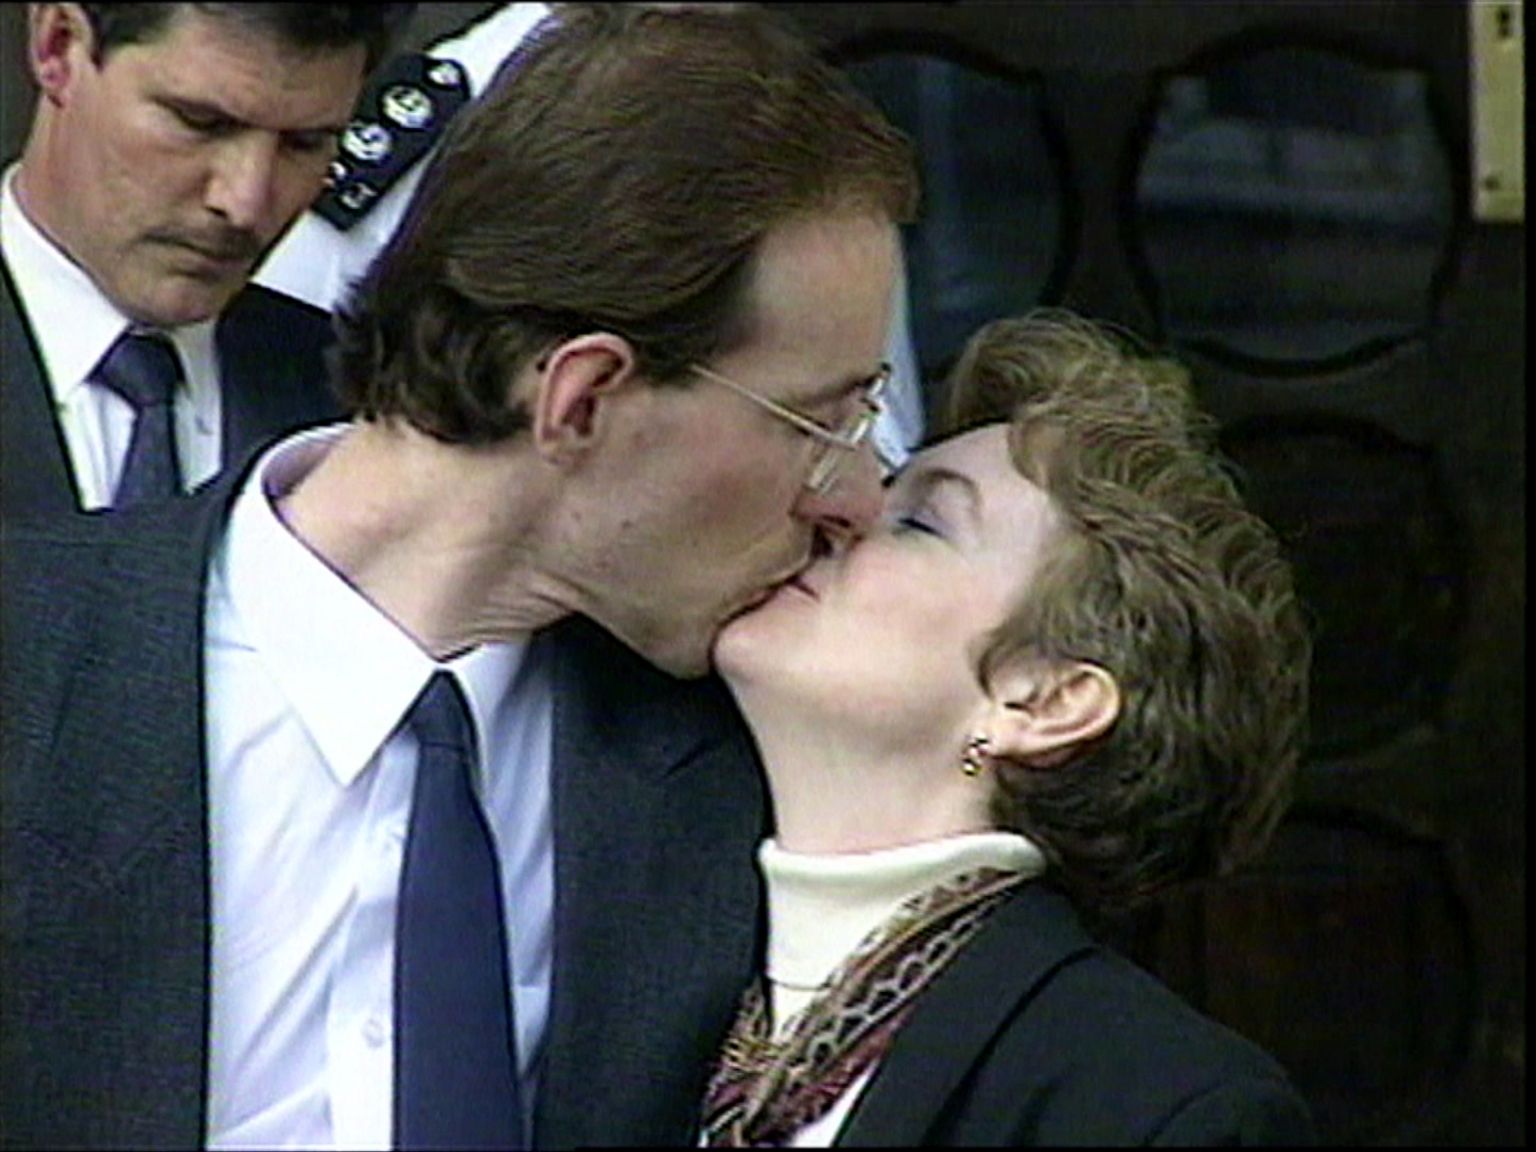 Cheryl and Jonathan kiss outside court after his conviction is quashed